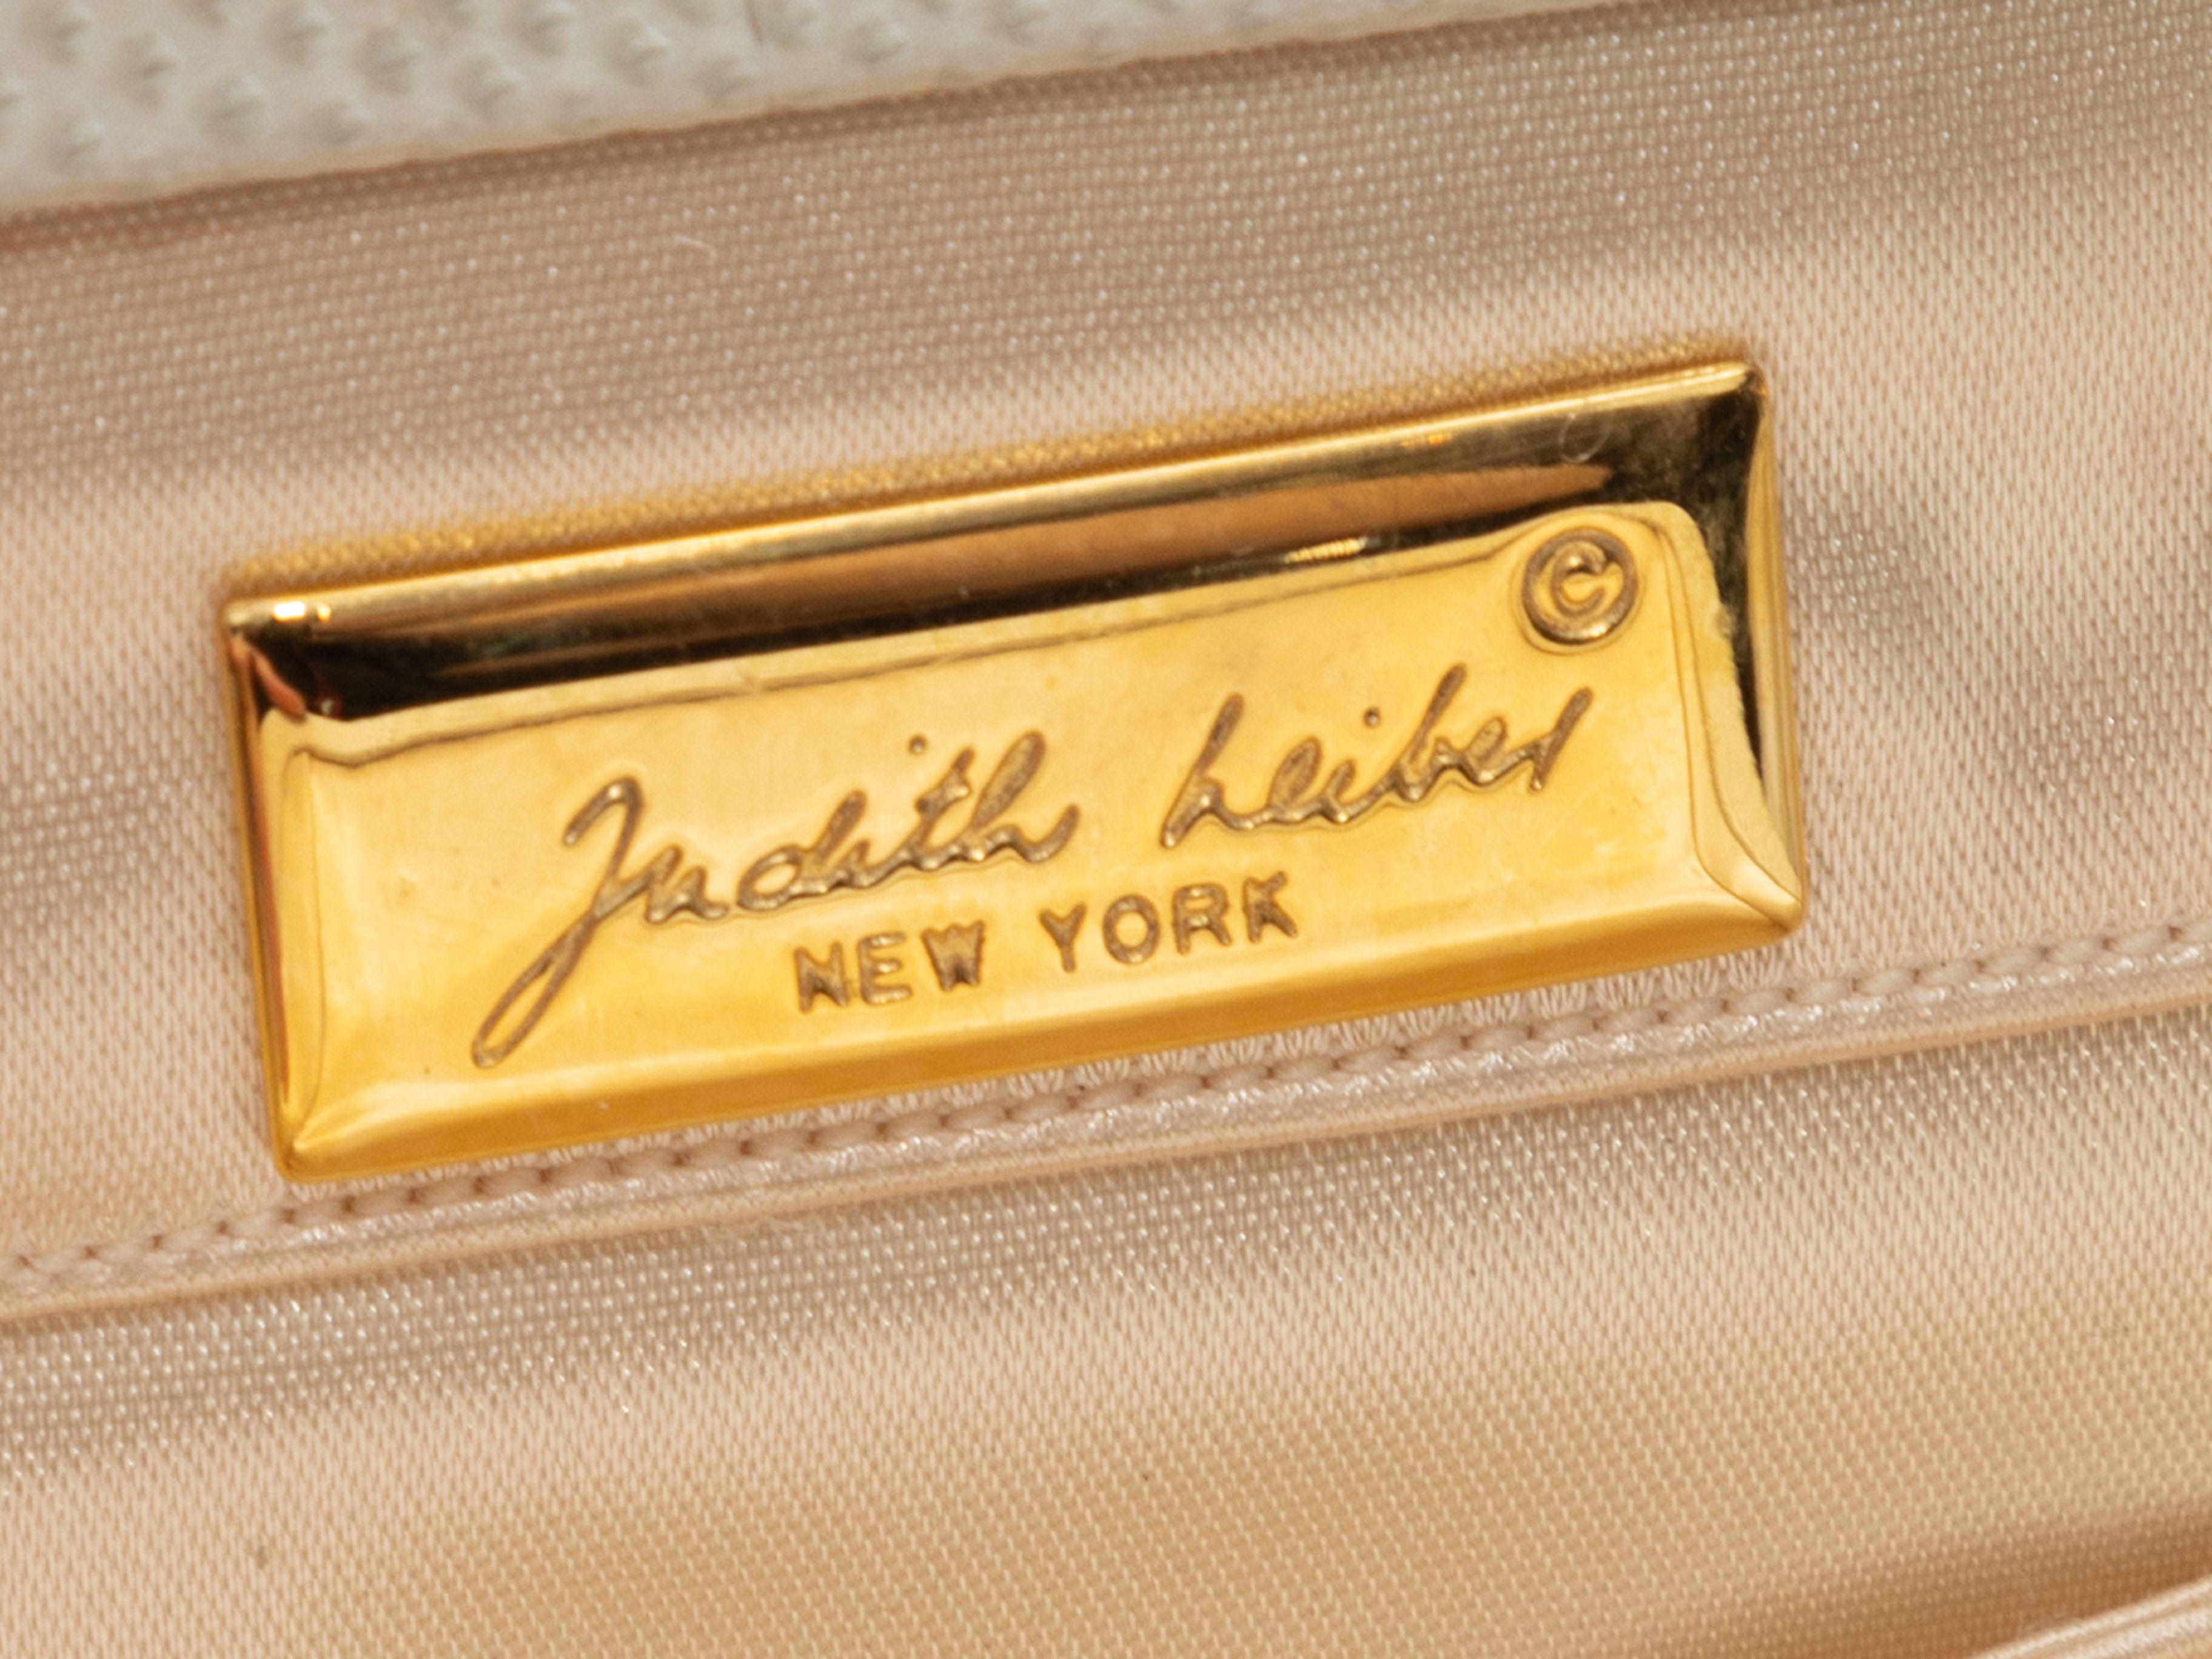 Product Details: Vintage White Judith Leiber Lizard Frame Clutch. This clutch features a lizard skin body, gold-tone hardware, an optional shoulder strap, and a top bow clasp closure. 8.5